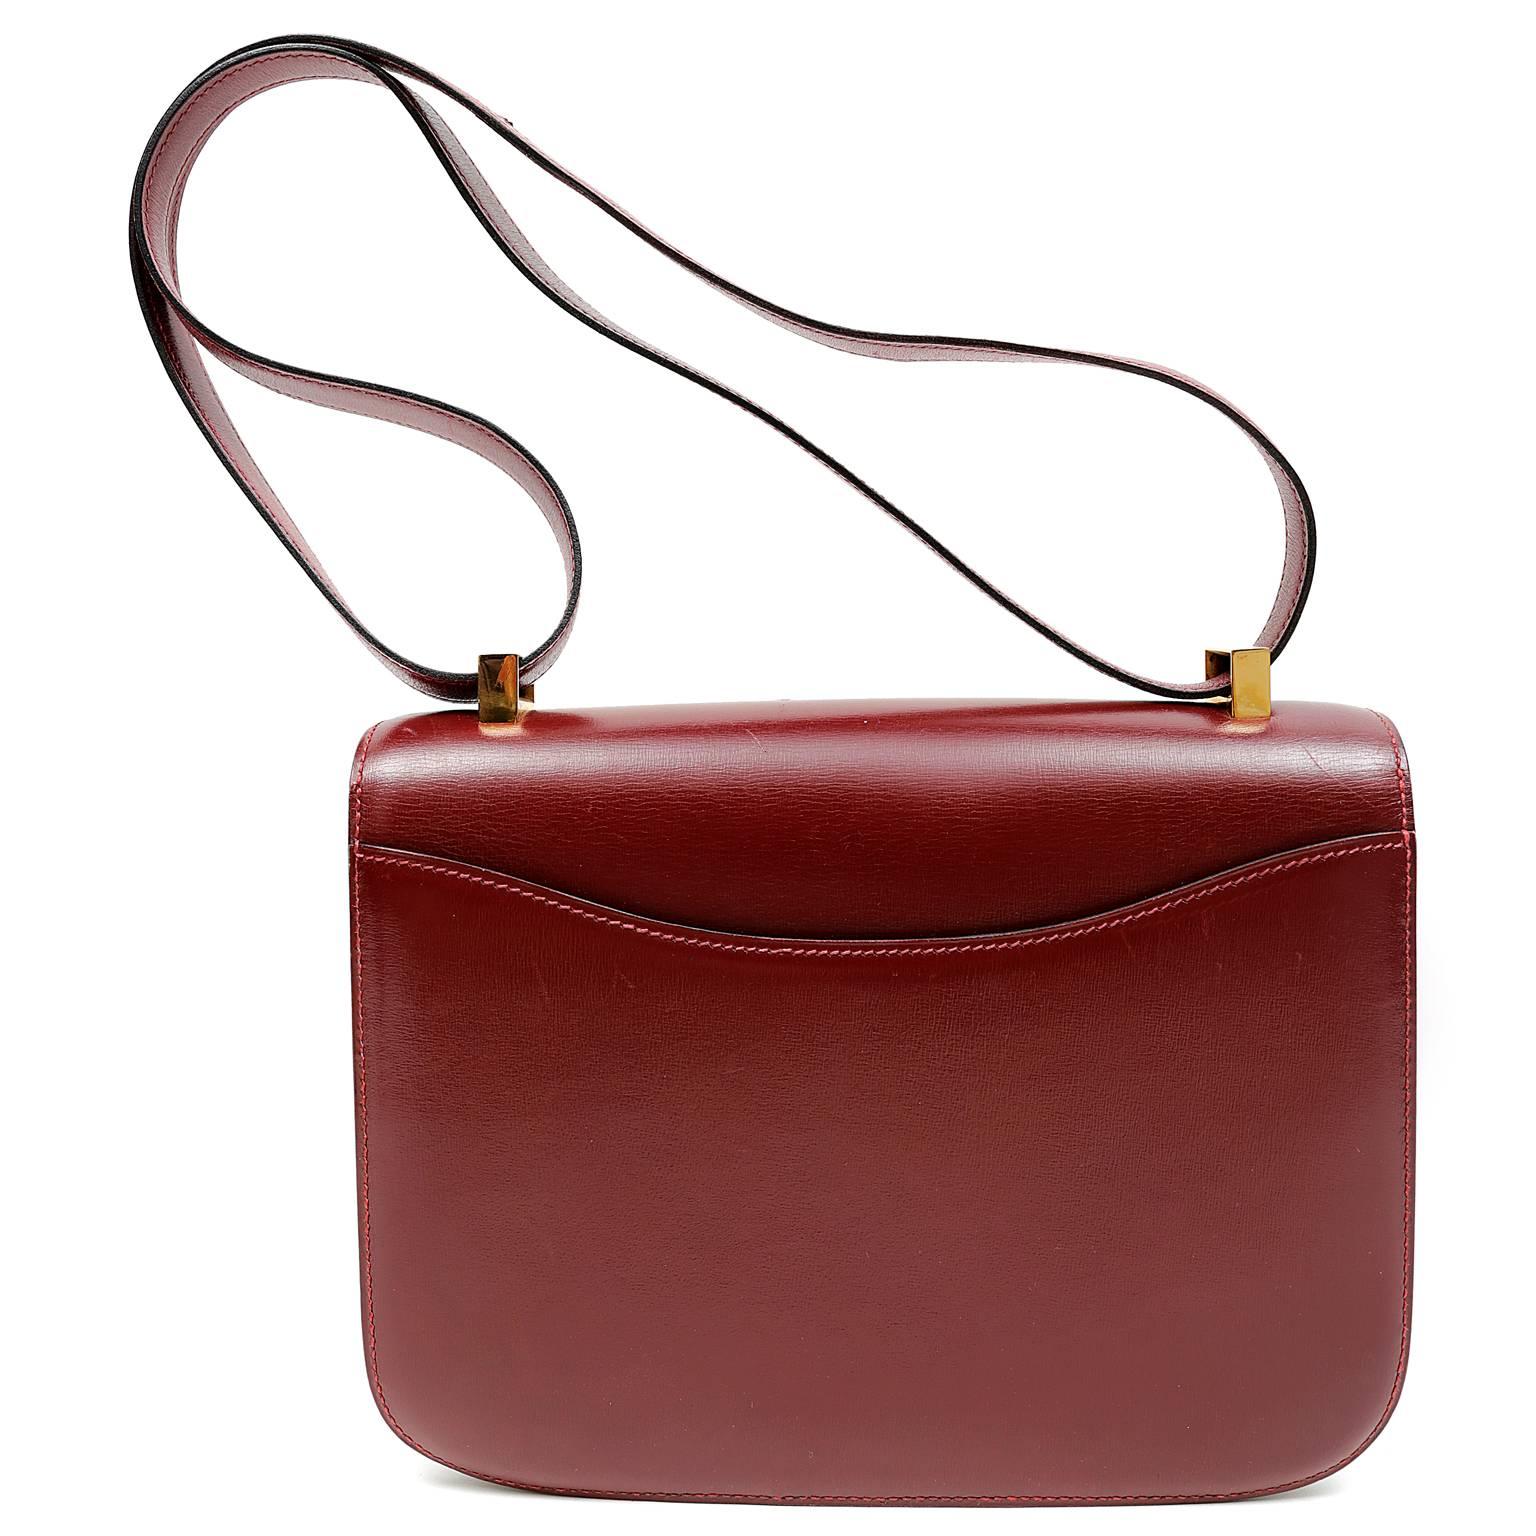 Hermès Burgundy Box Calf 23 cm Constance is in beautiful condition, nearly pristine. One of Jackie O’s favorite Hermès styles, she was often photographed wearing one of the many Constance bags in her collection. Highly sought after, the Constance